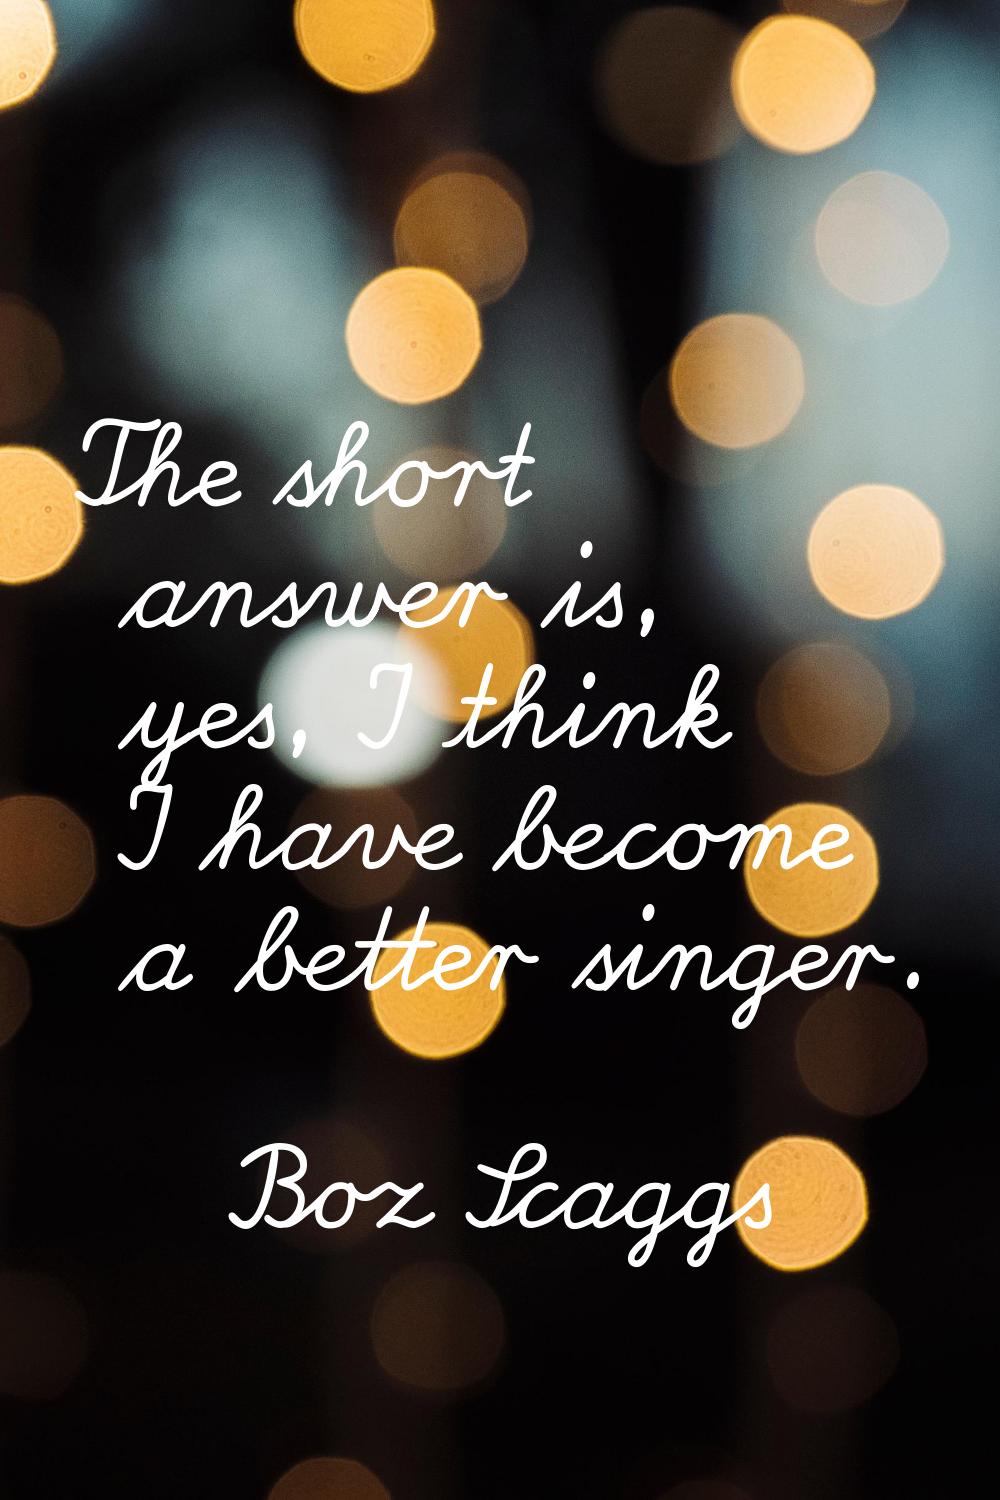 The short answer is, yes, I think I have become a better singer.